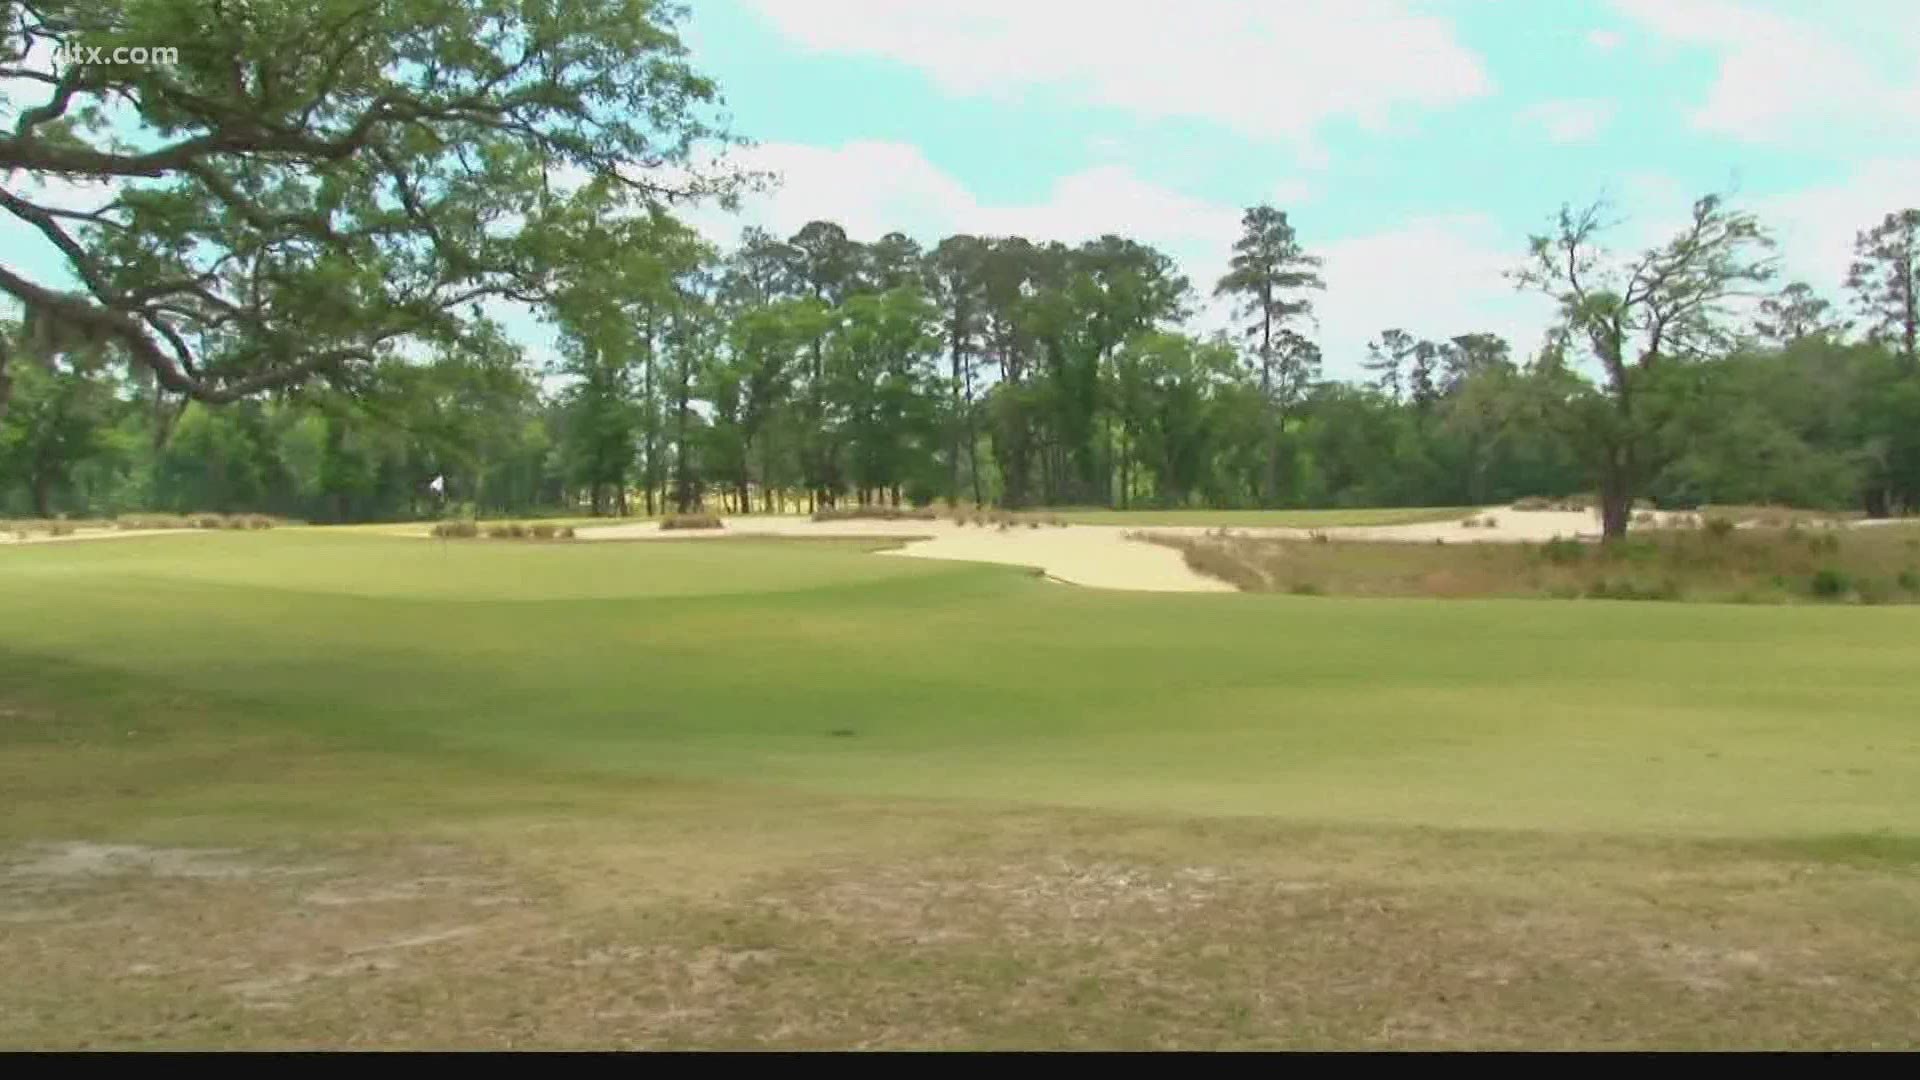 With the world's top-ranked golfer headlining the field, the Palmetto Champion at Congaree will bring the PGA Tour back to the Lowcountry next month.